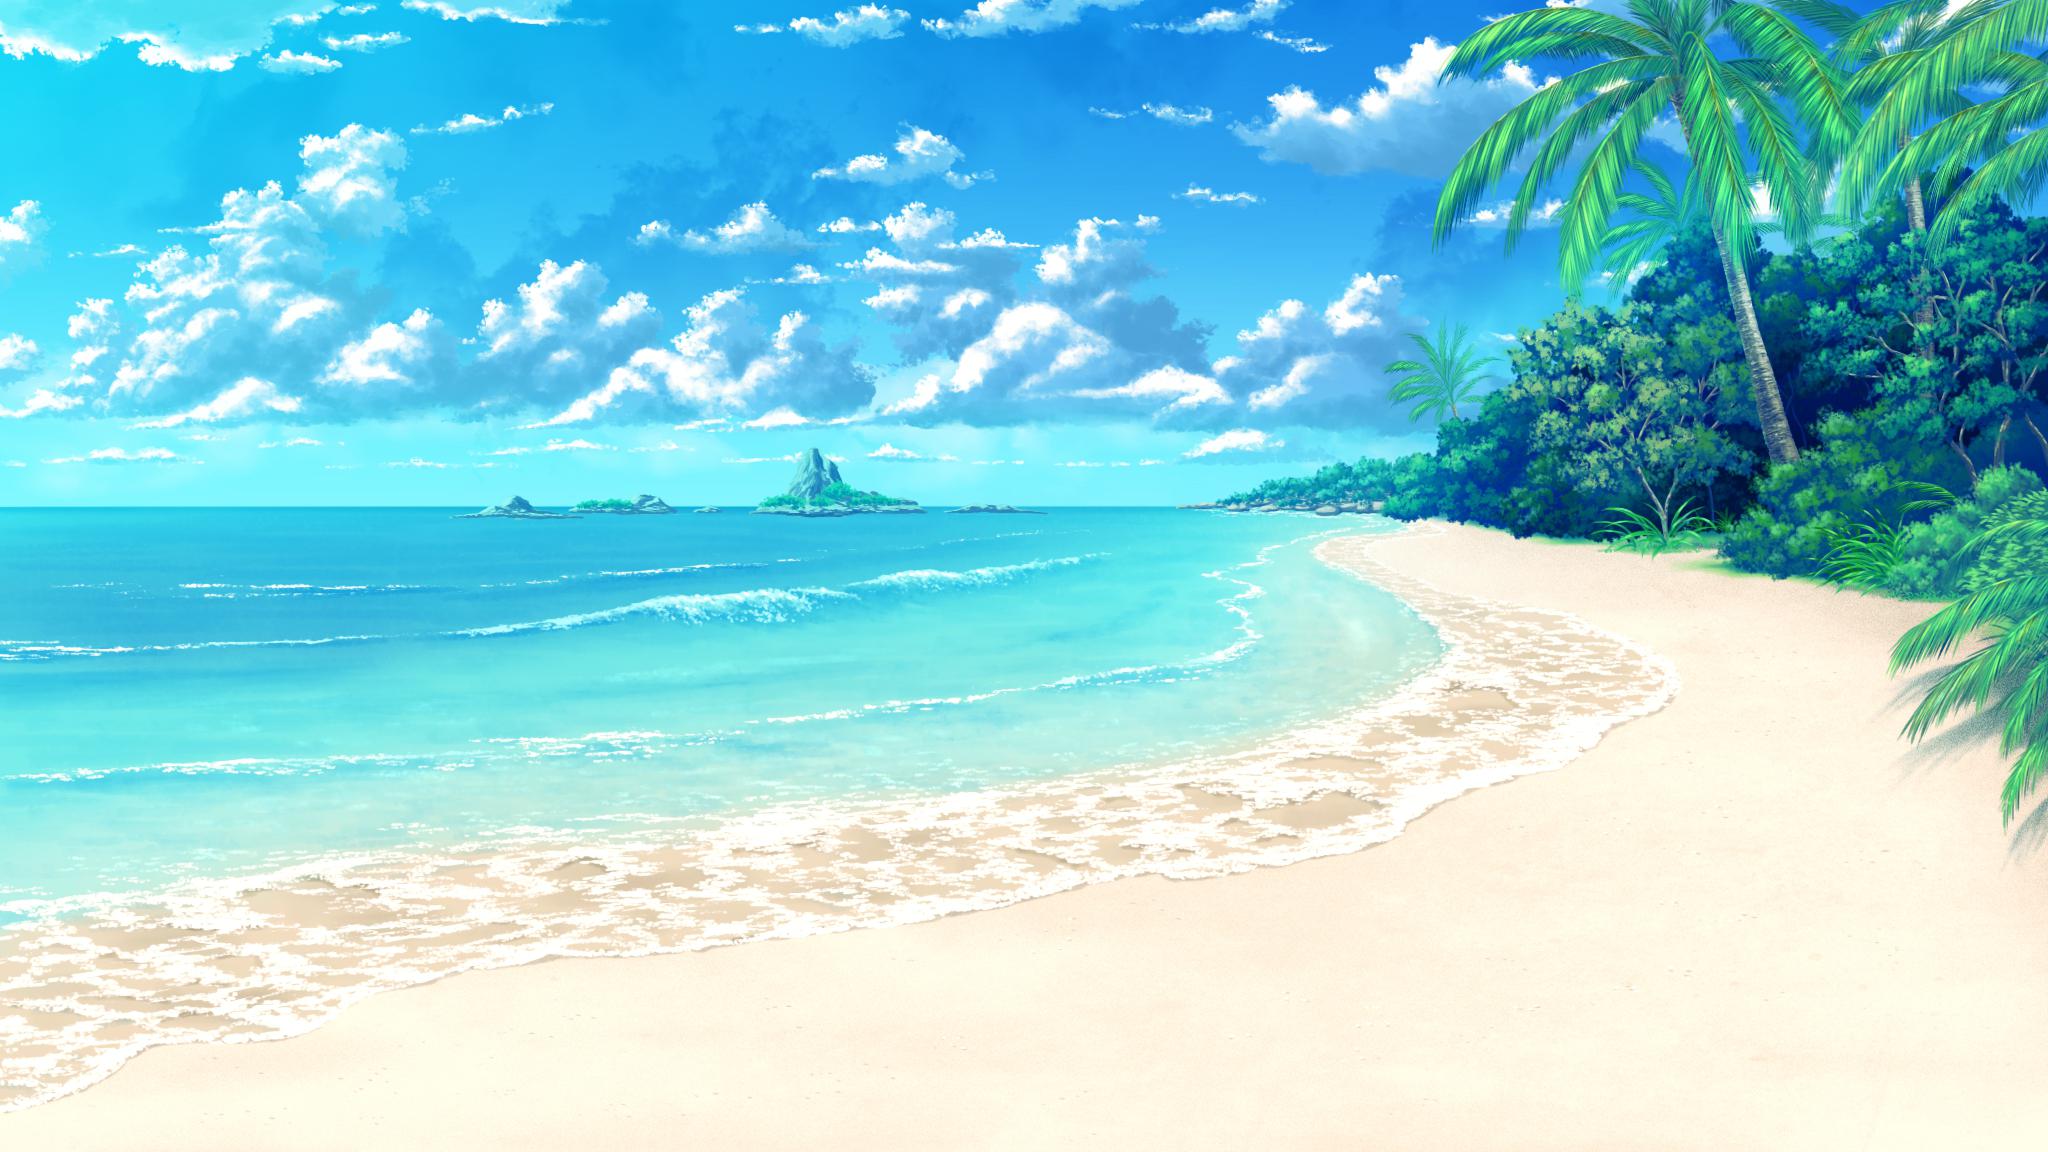 Anime Beach Wallpapers Wallpaper Cave